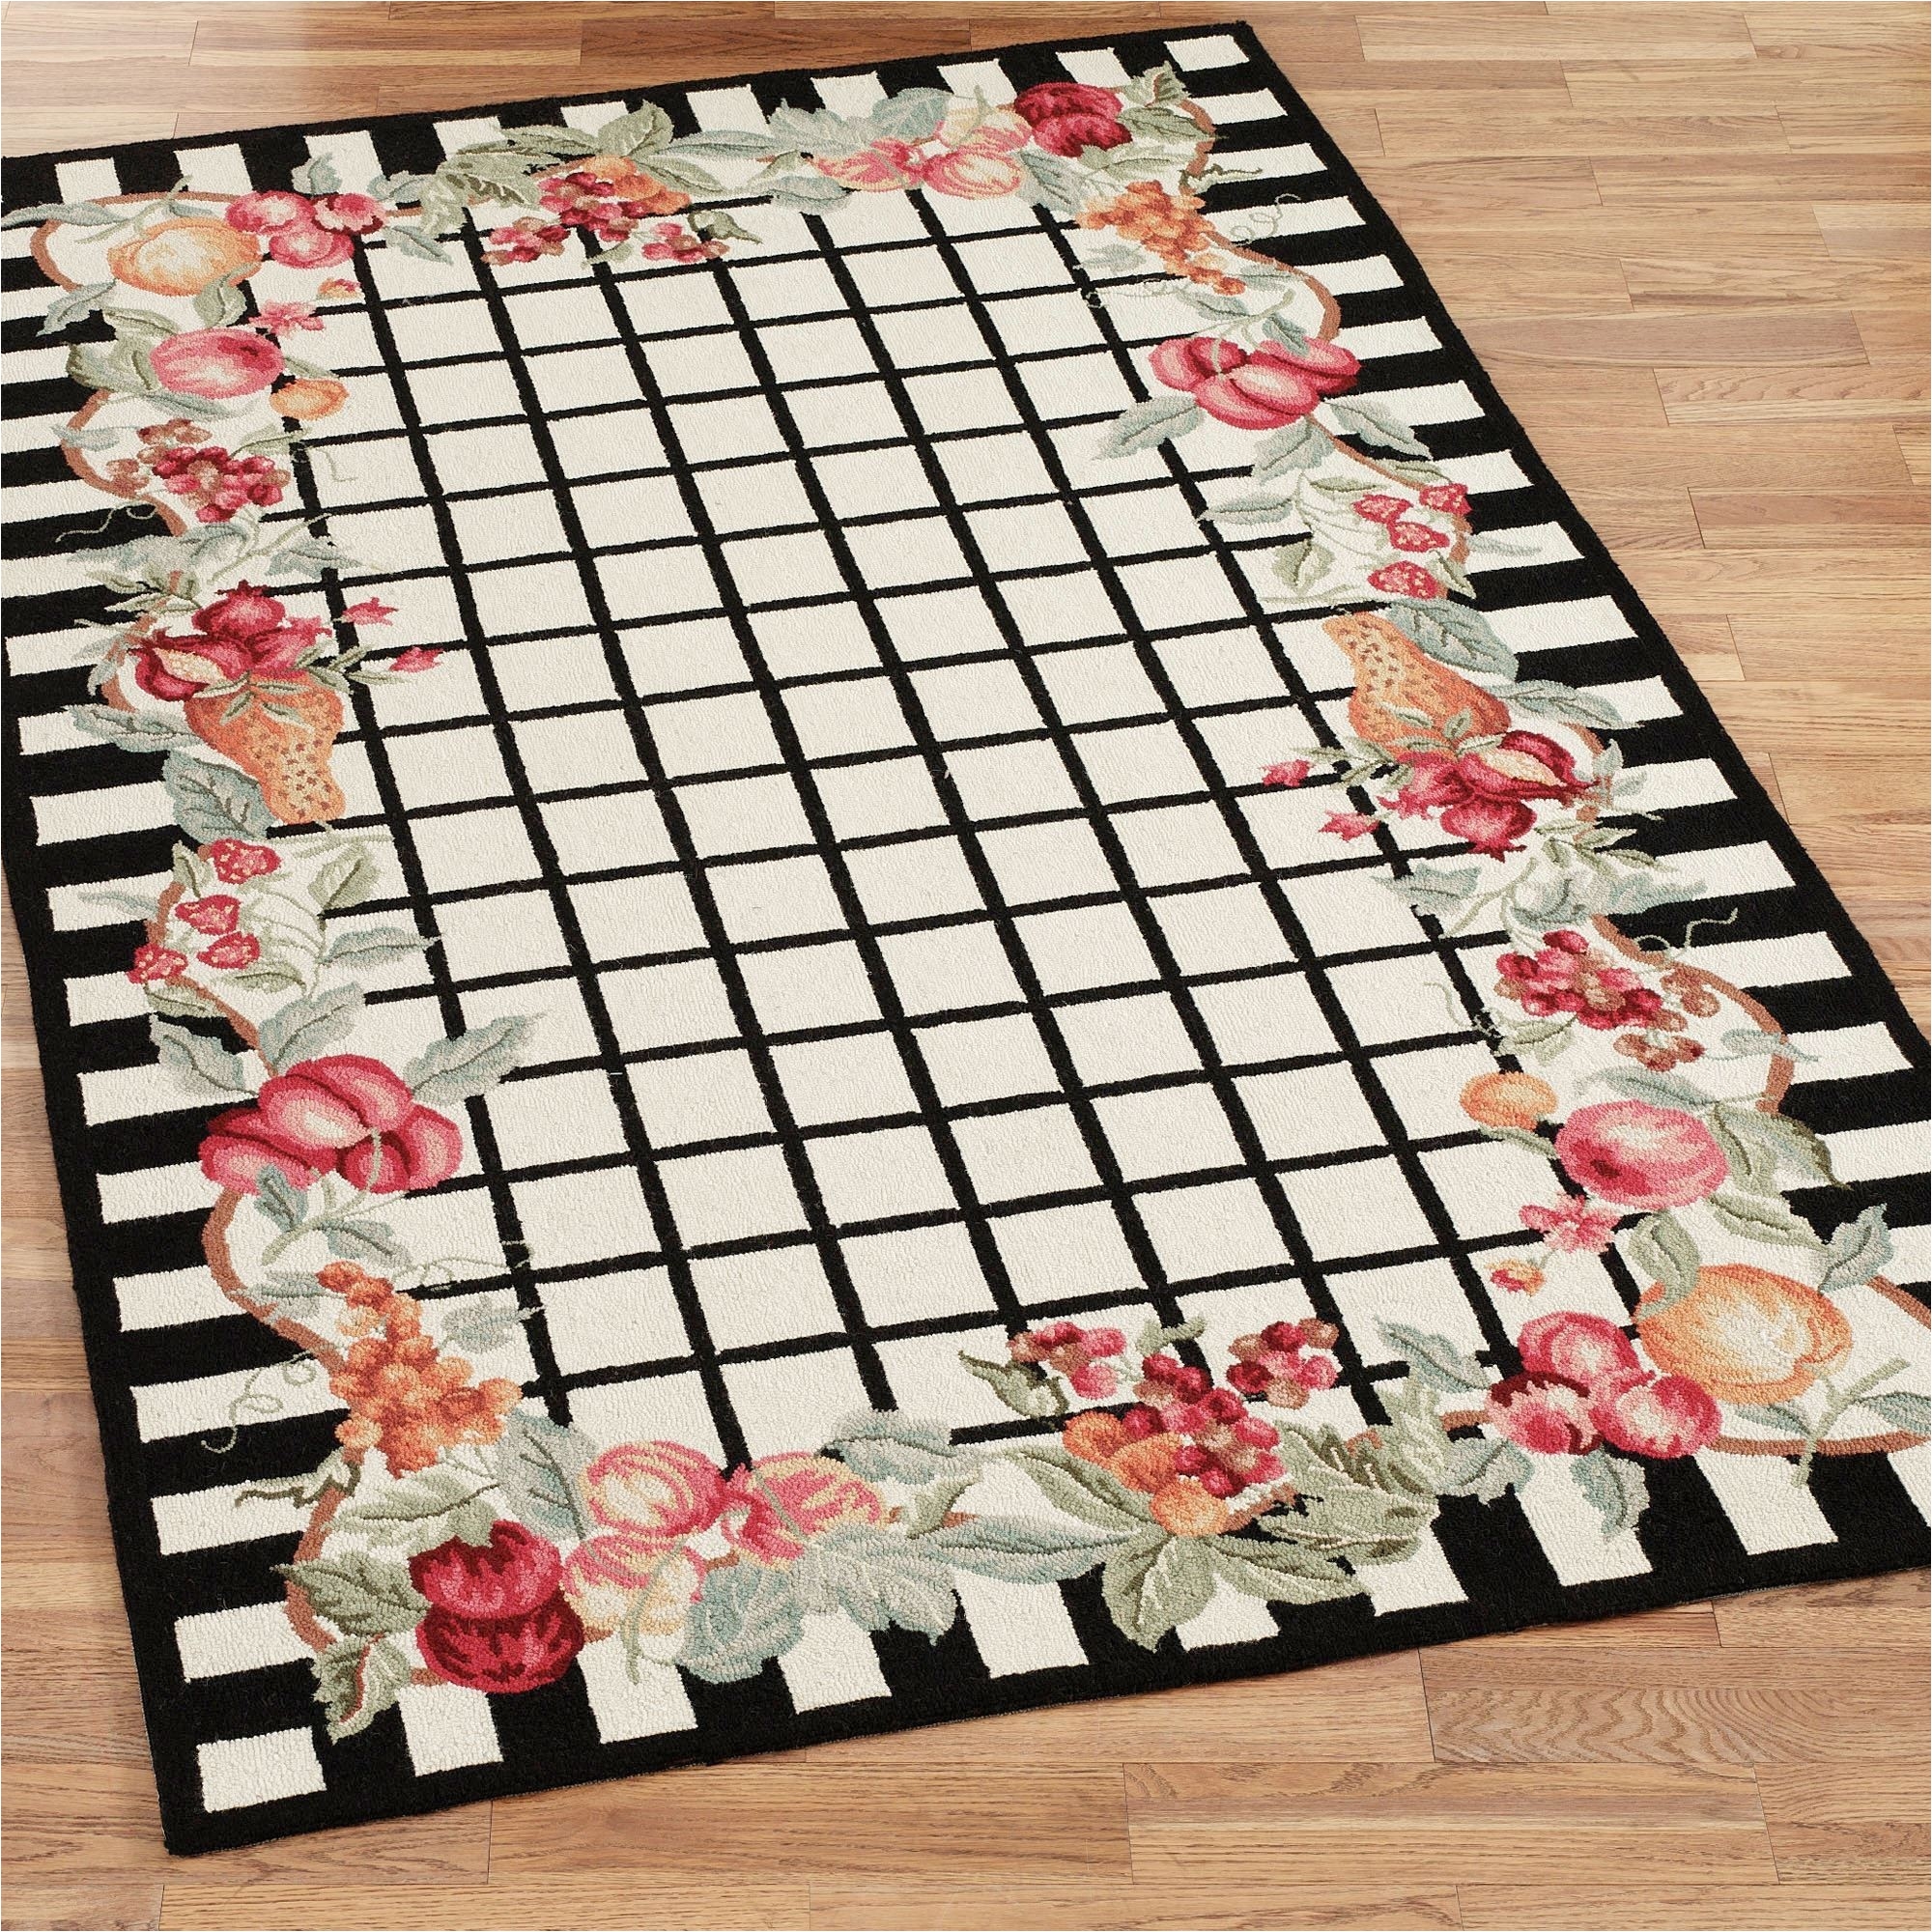 red black white area rugs lovely black and white kitchen rug beautiful kuchyaa a family